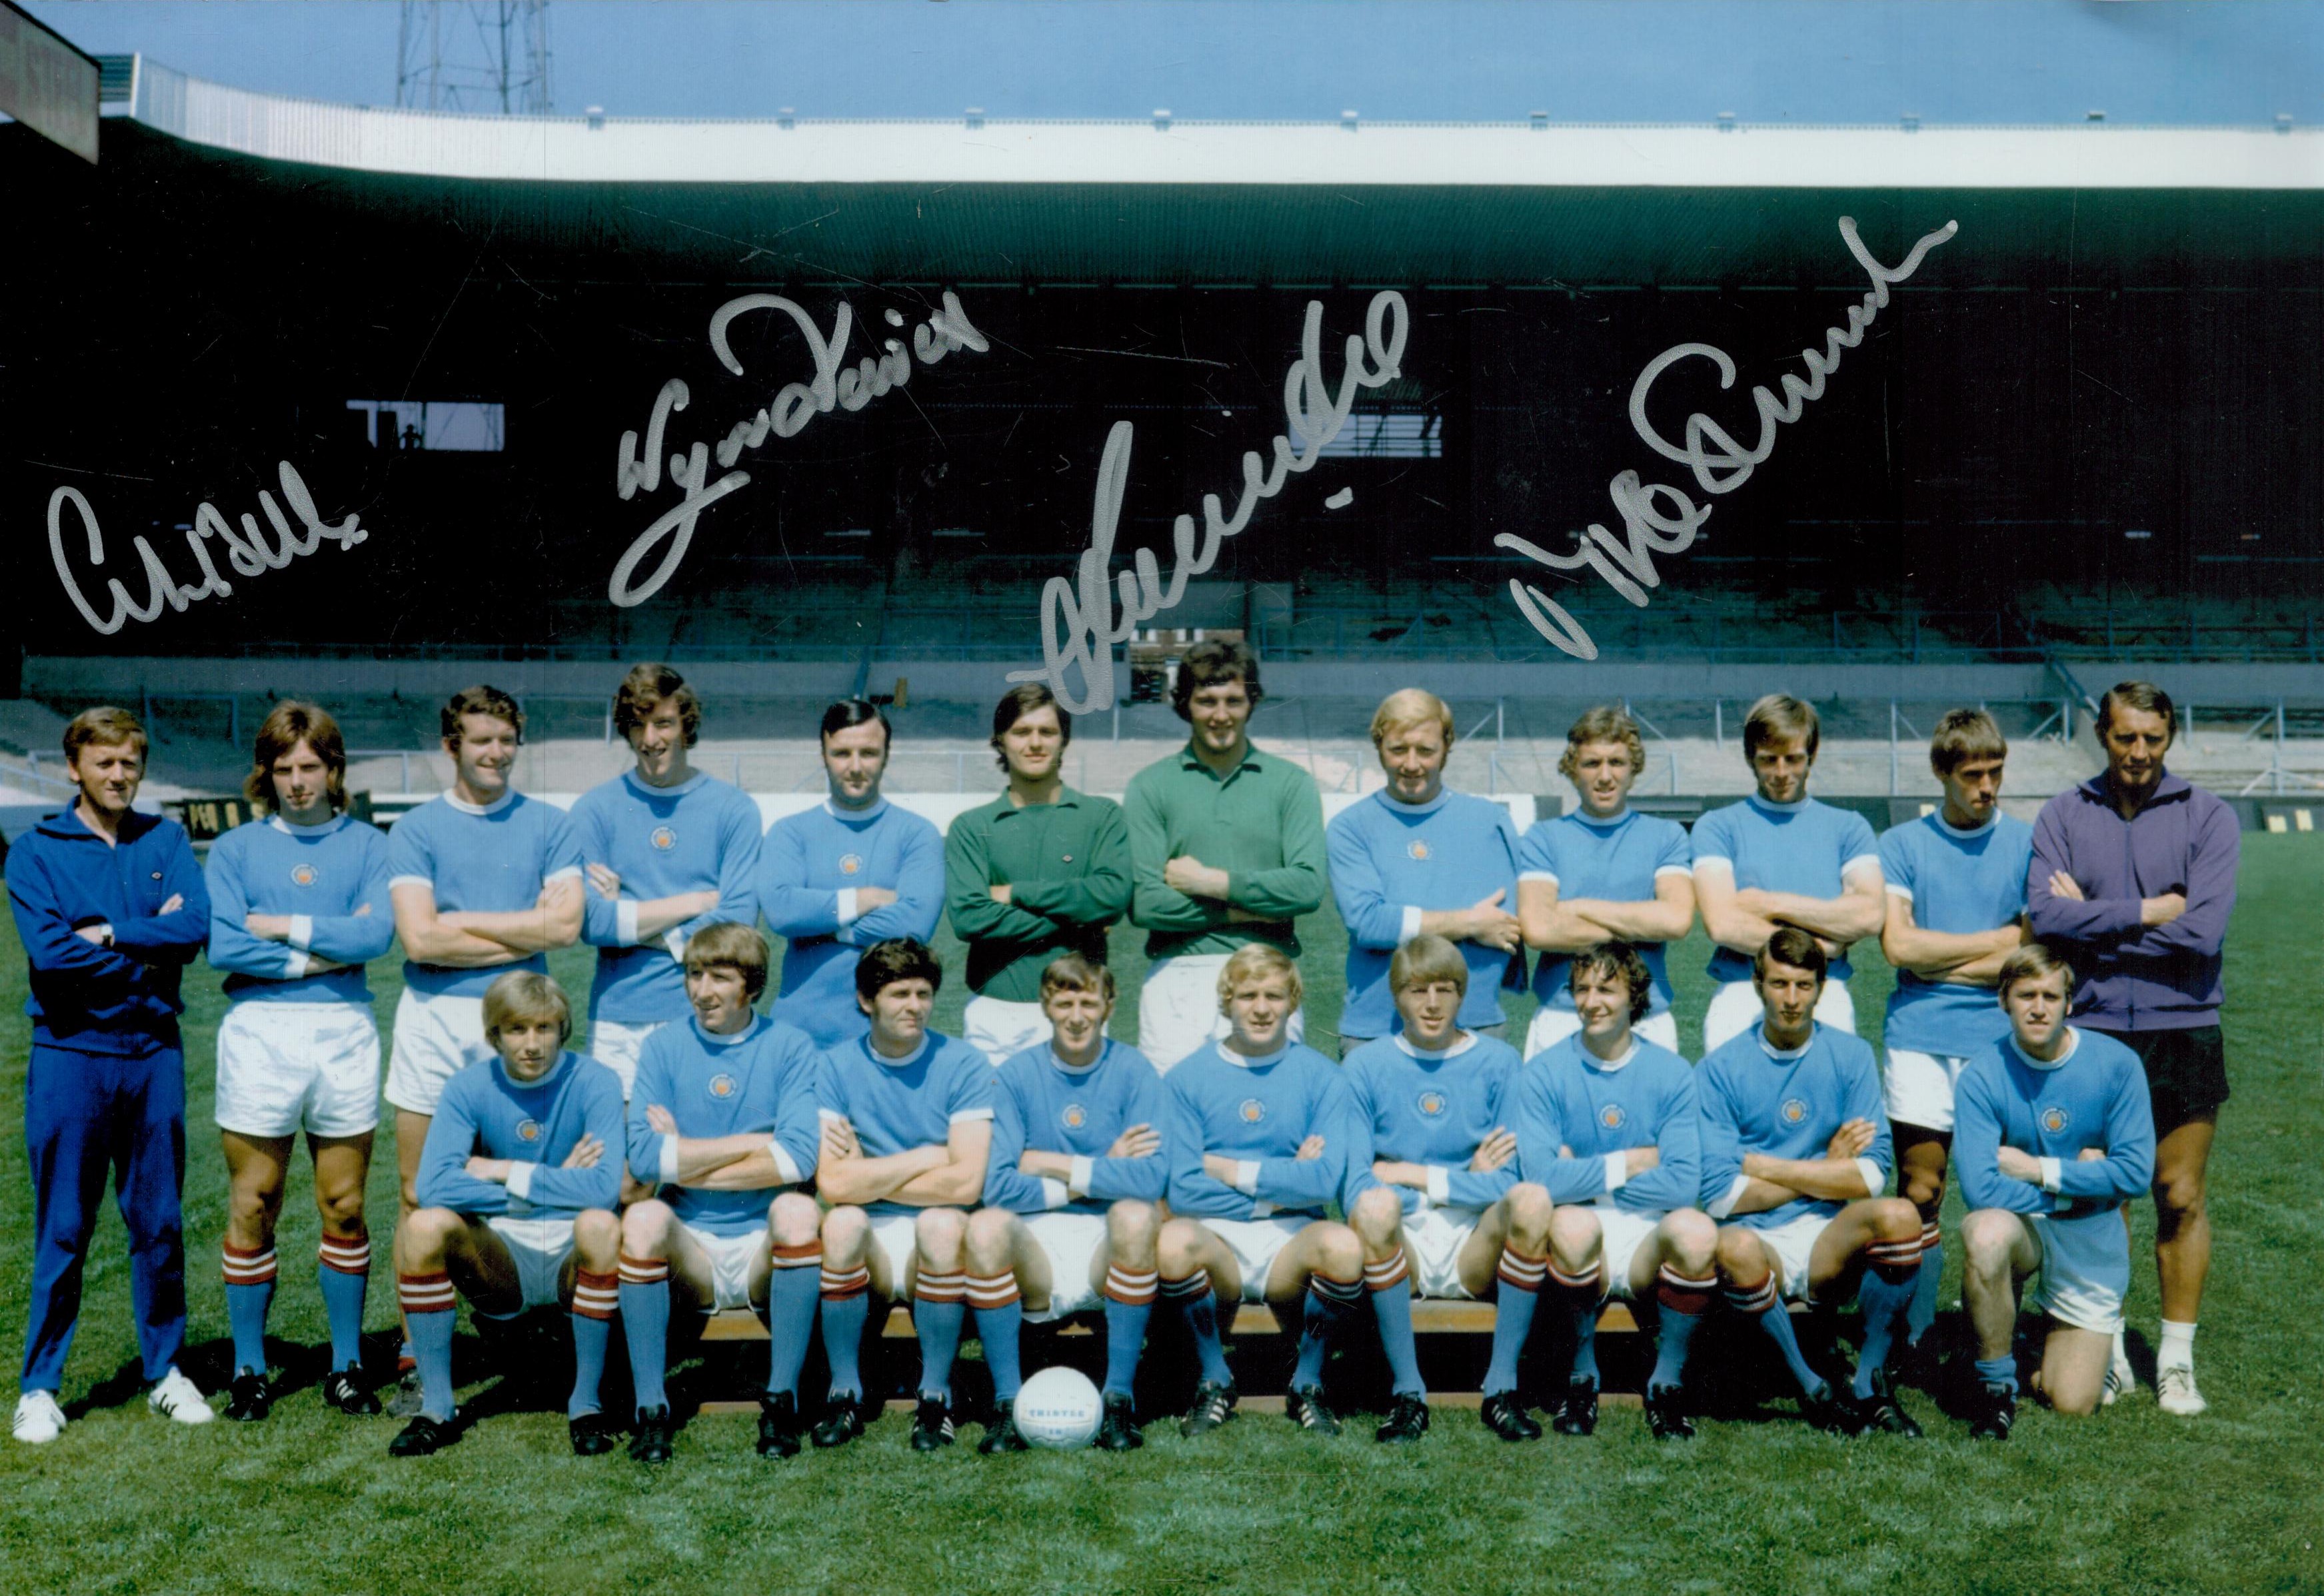 Multi signed Mike Summerbee, OBE plus 3 others Colour Photo 12x8 Inch. Good condition. All